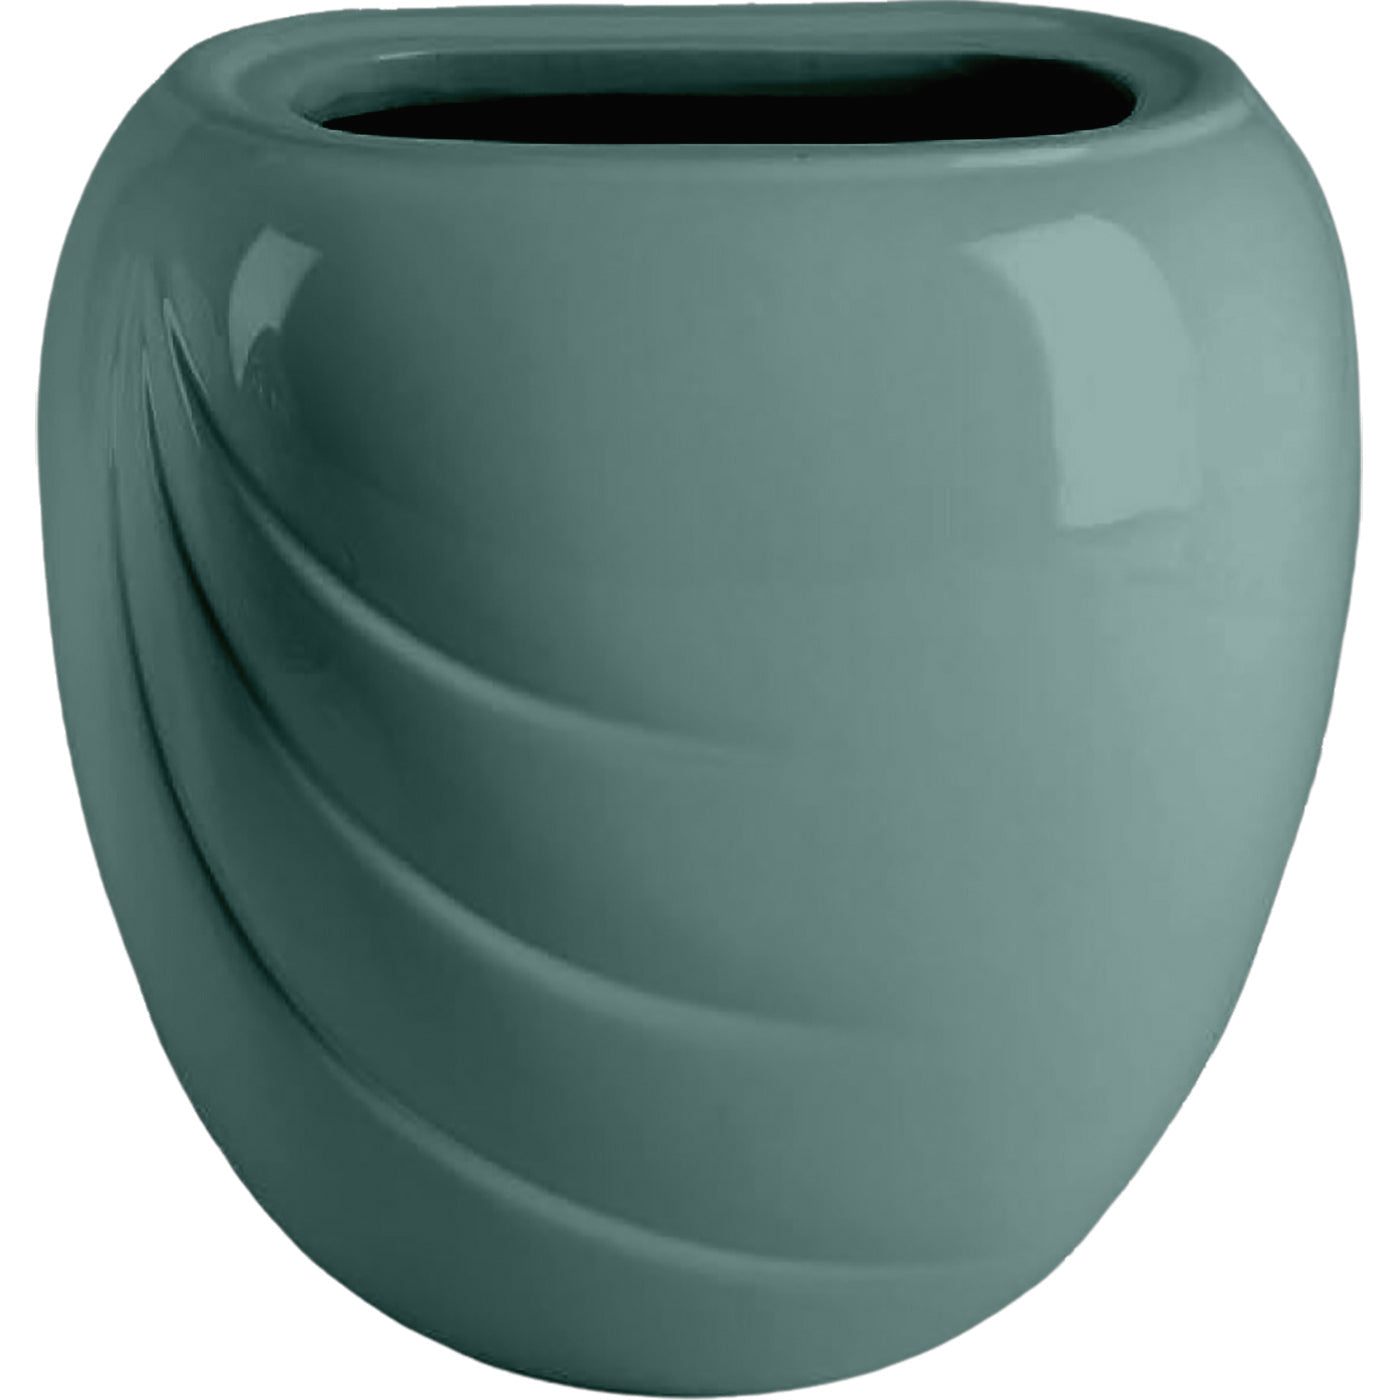 Rectangular grave vase Ecotre green 19x17cm - 7.5x6.7in In green porcelain, wall attached ECO148P/V